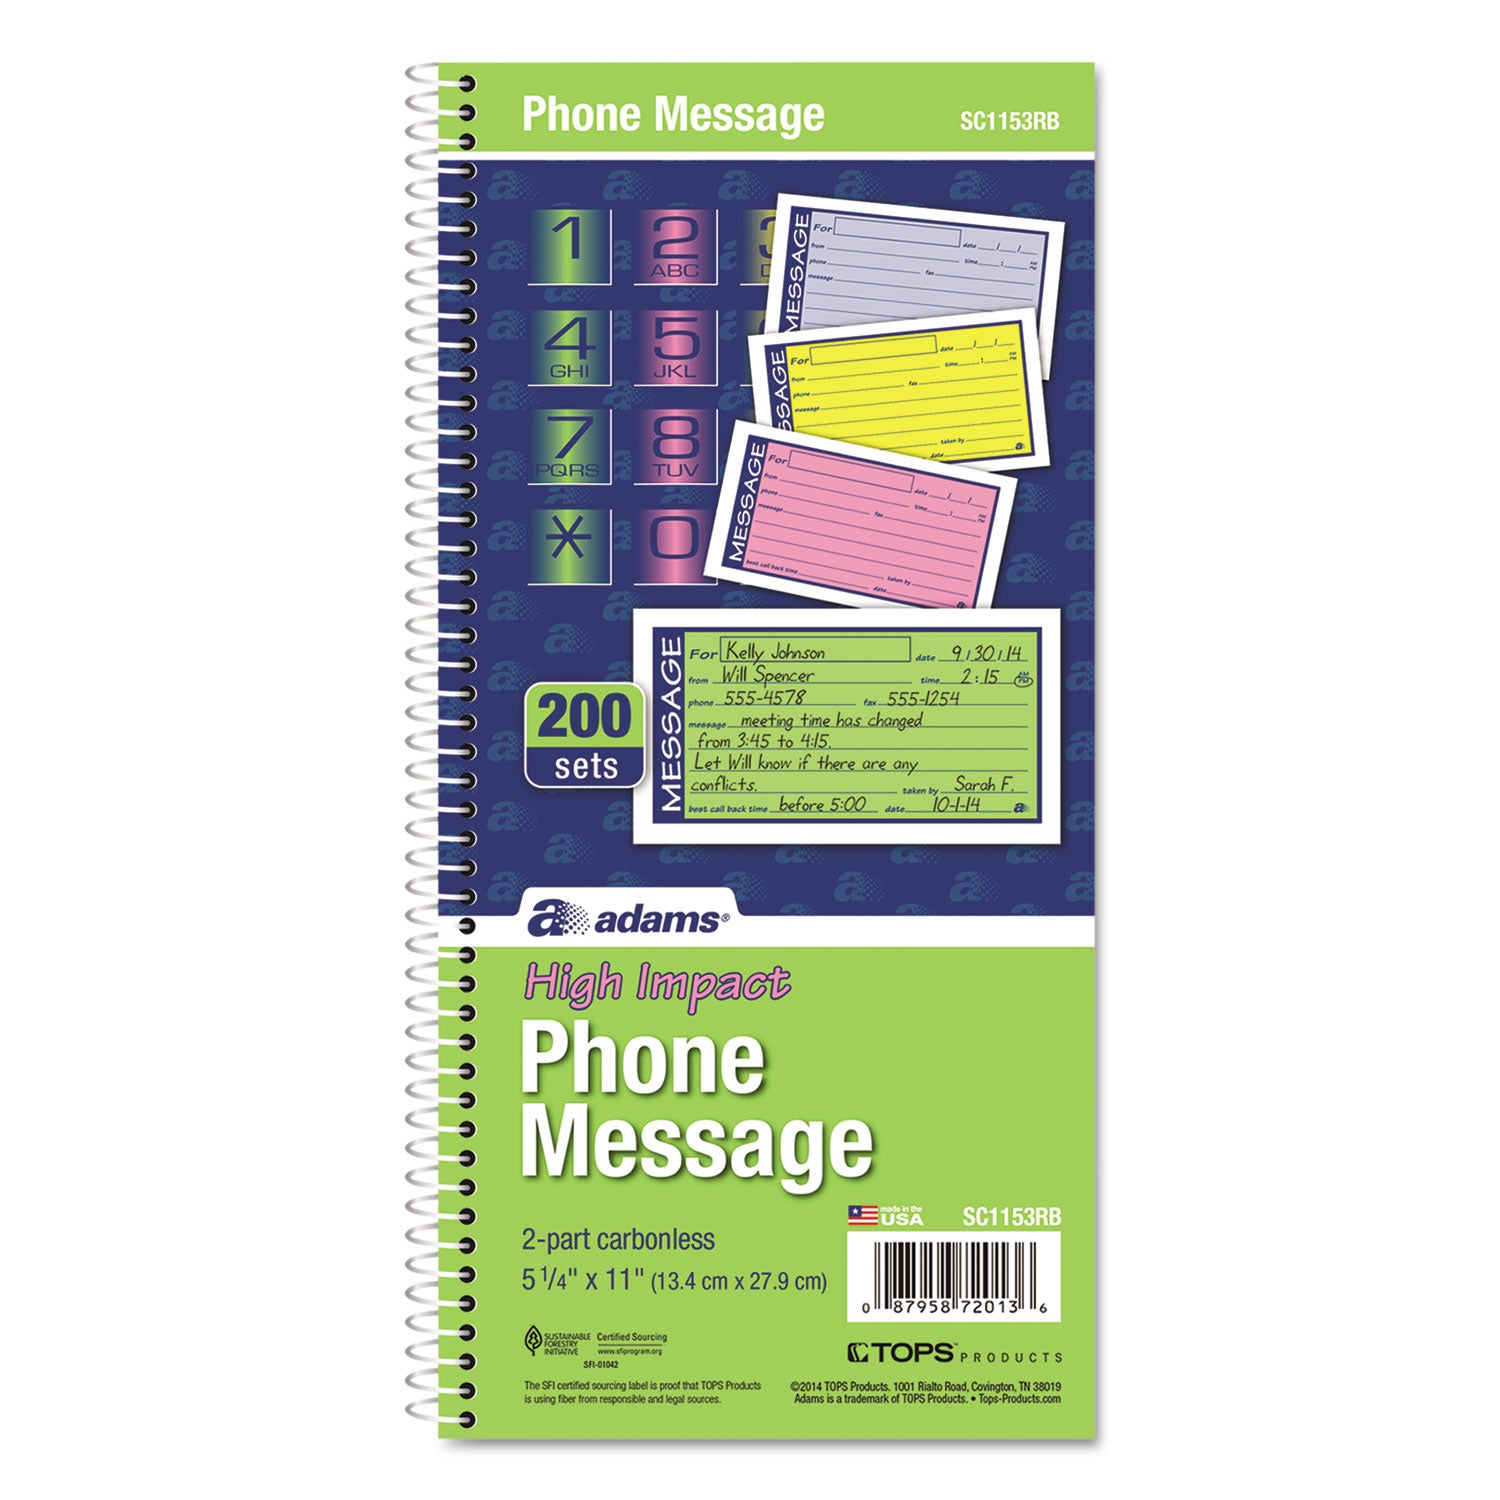 Wirebound Telephone Book with Multicolored Messages, Two-Part Carbonless, 4.75 x 2.75, 4 Forms/Sheet, 200 Forms Total - 